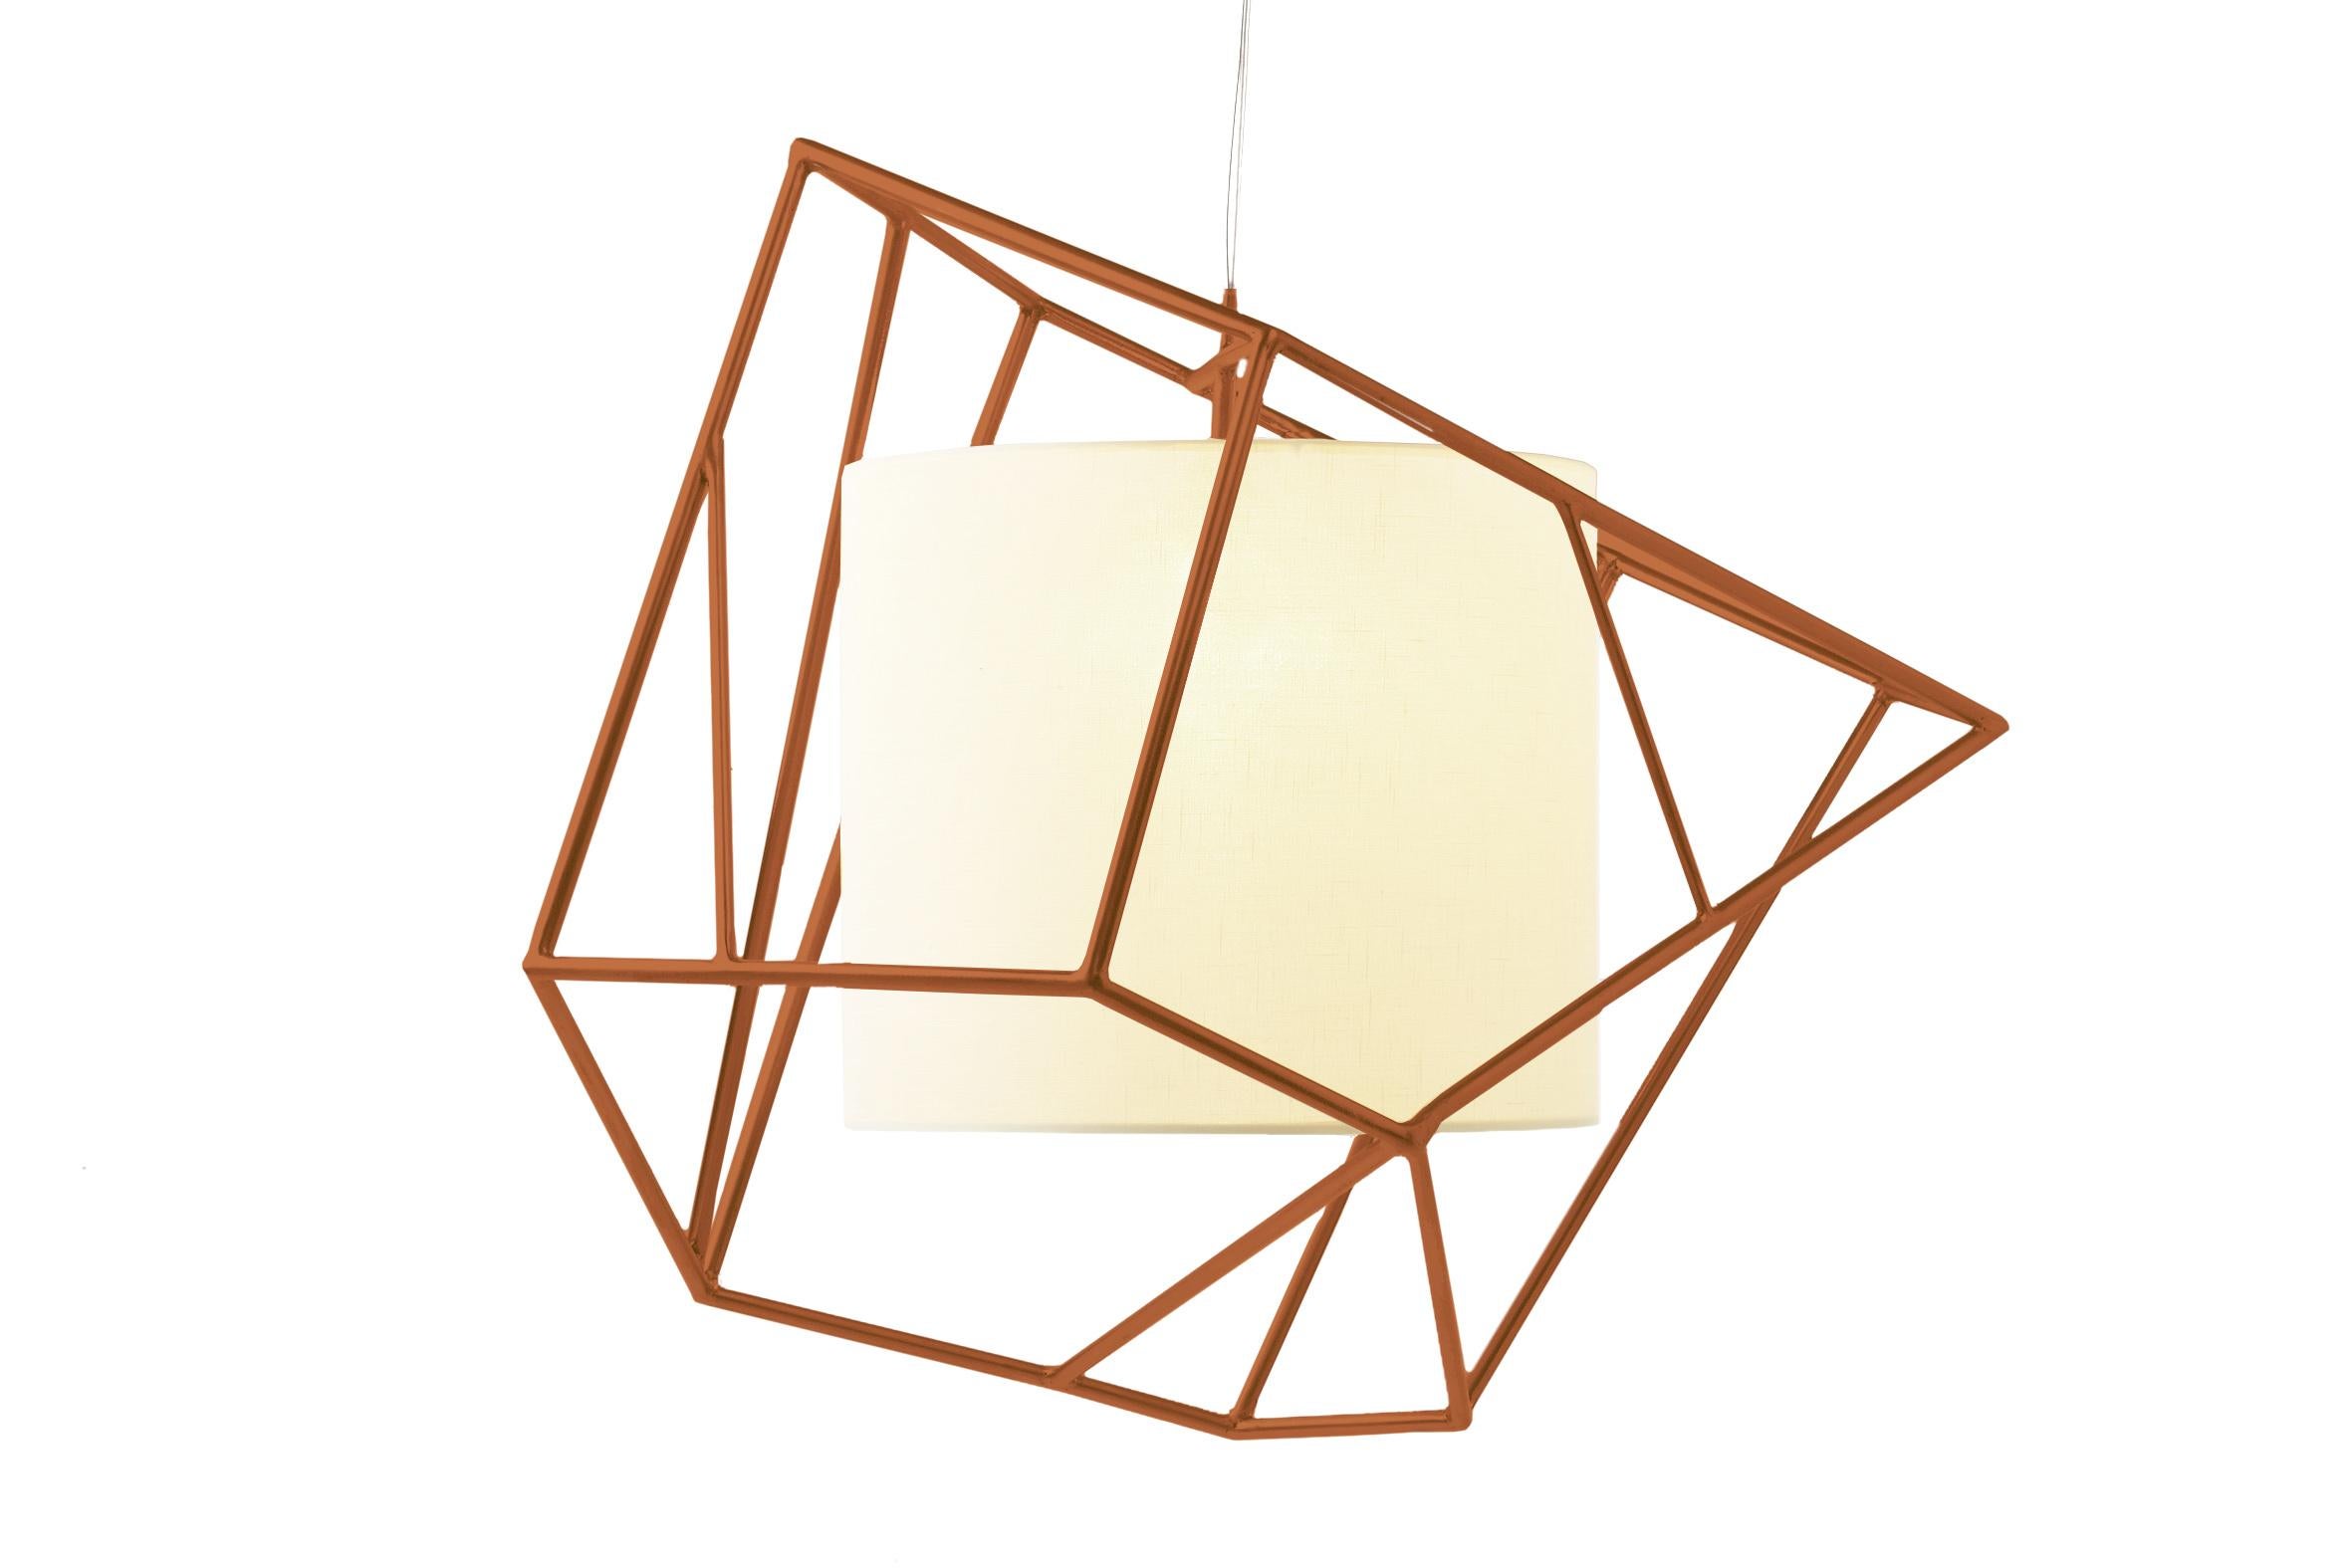 A game between balance and light. Its shape is unexpected while built with geometric segments but organic as a wholei an elegant Chandelier.
Star I Pendant Lamp makes a statement in any space, whether it's one of tradition and elegance or unexpected